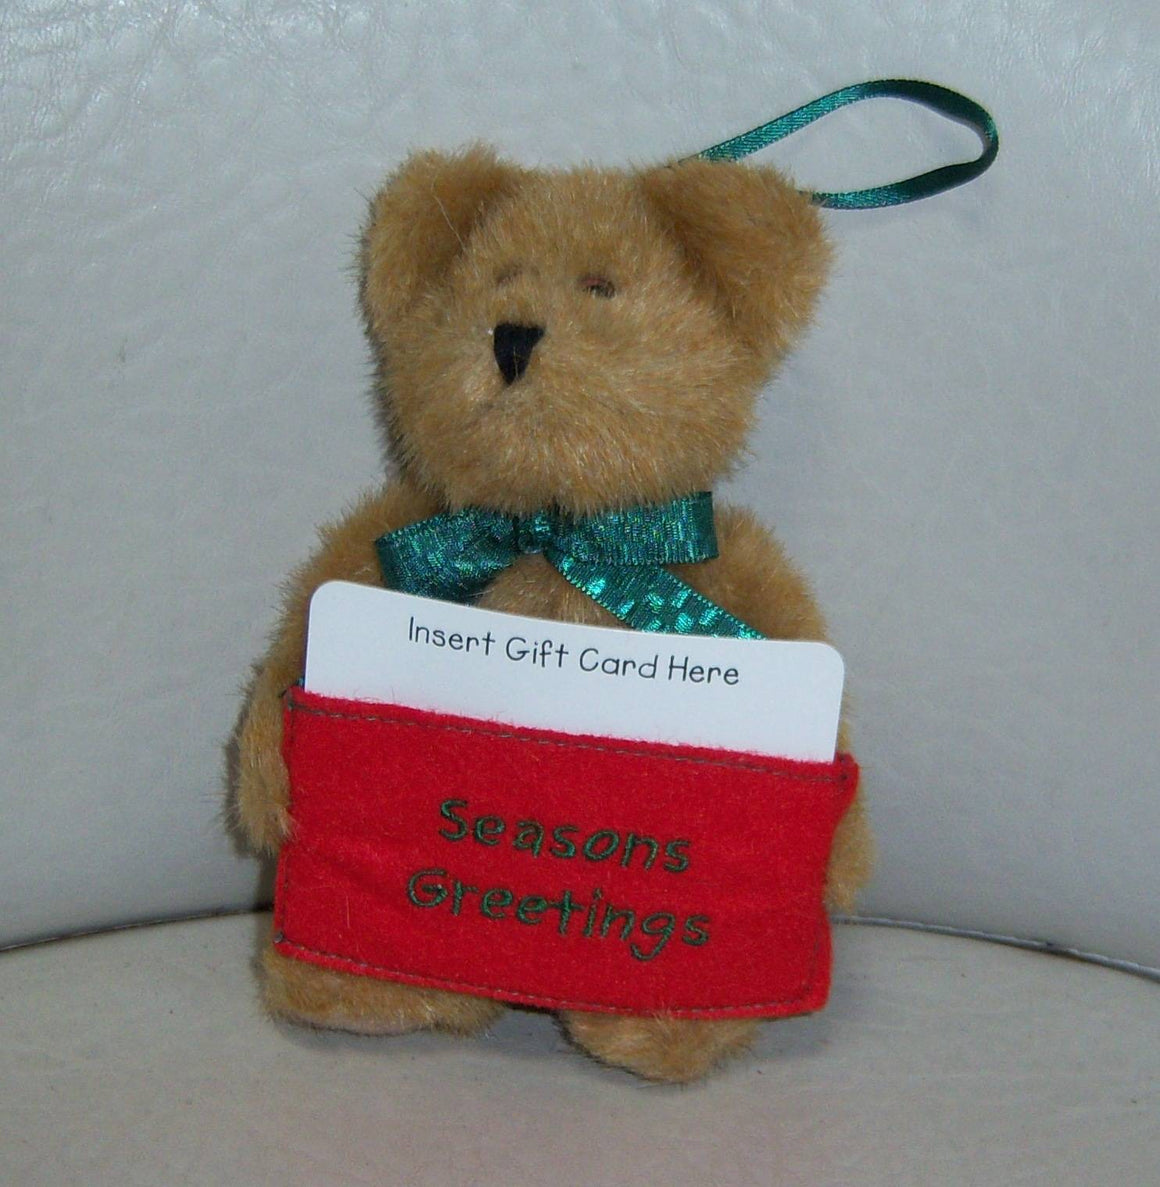 Seasons Greetings-Boyds Bears Gift Card Holder/Ornament #94985CC Country Clutter Exclusive ***RARE*** *